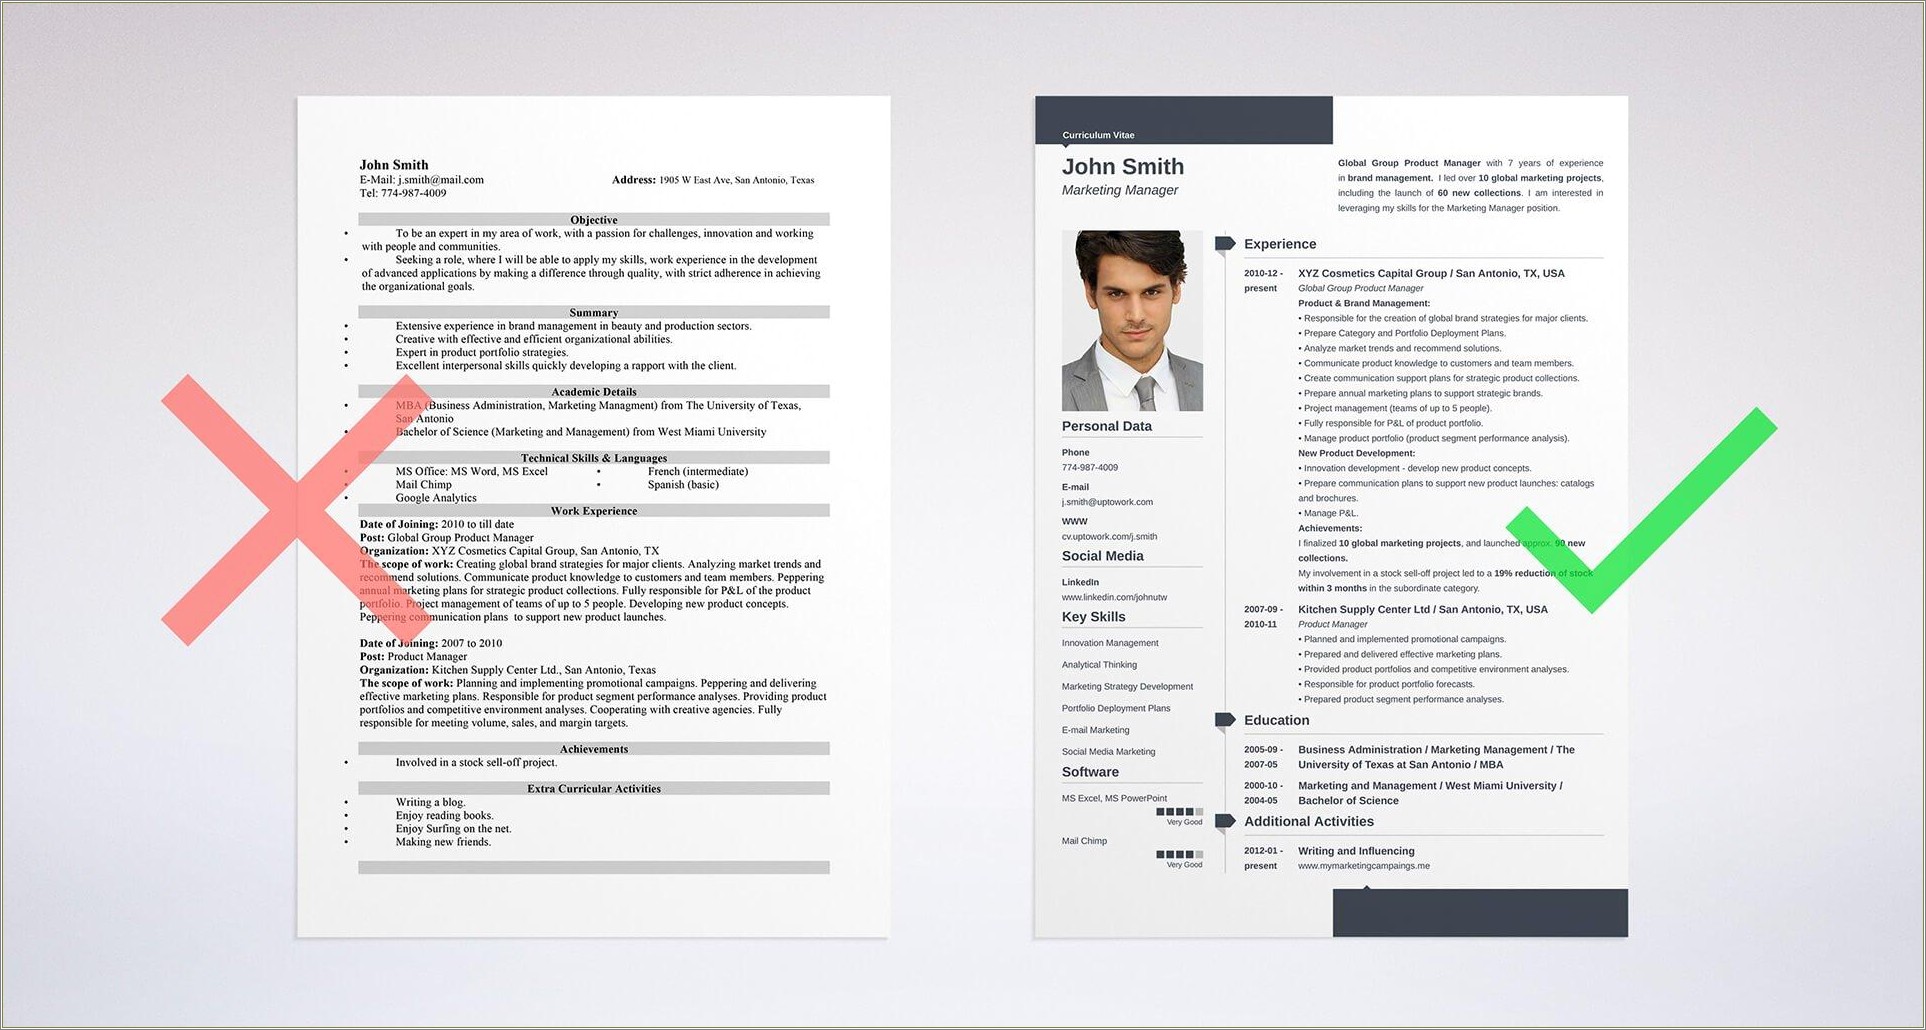 Examples Of Skills For A Job Resume